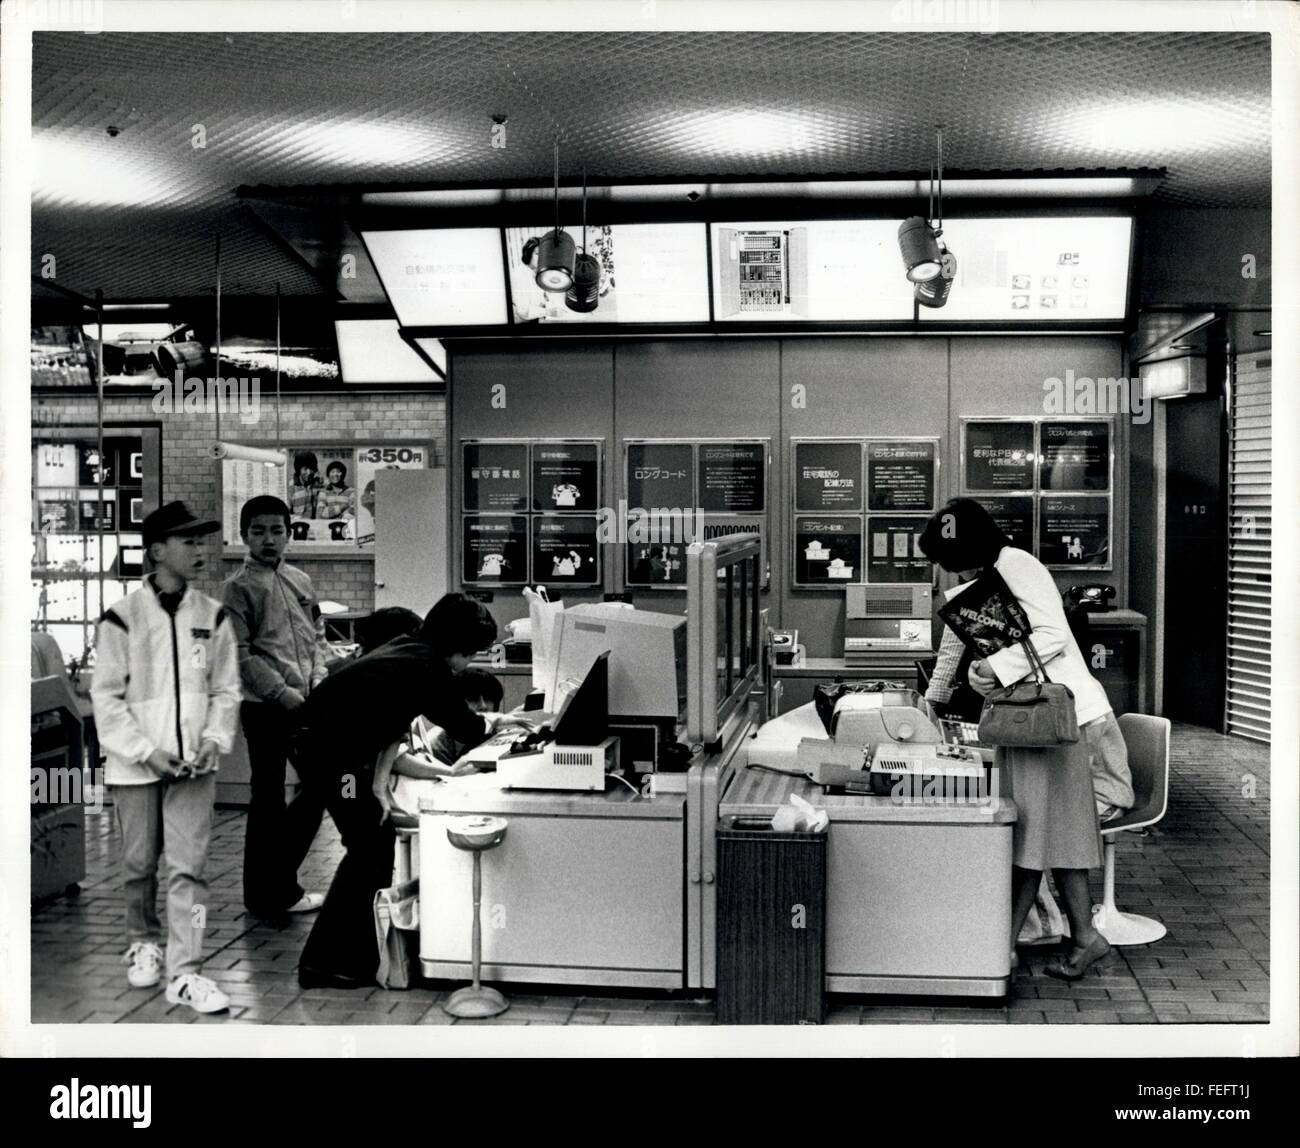 1981 - In Japan all telephone equipment is owned by the Individual user. Photo shows a Japan telephone company store where people come to see the variose equipment and services available. Here people are looking at computer systems that tie into the phone systems. © Keystone Pictures USA/ZUMAPRESS.com/Alamy Live News Stock Photo